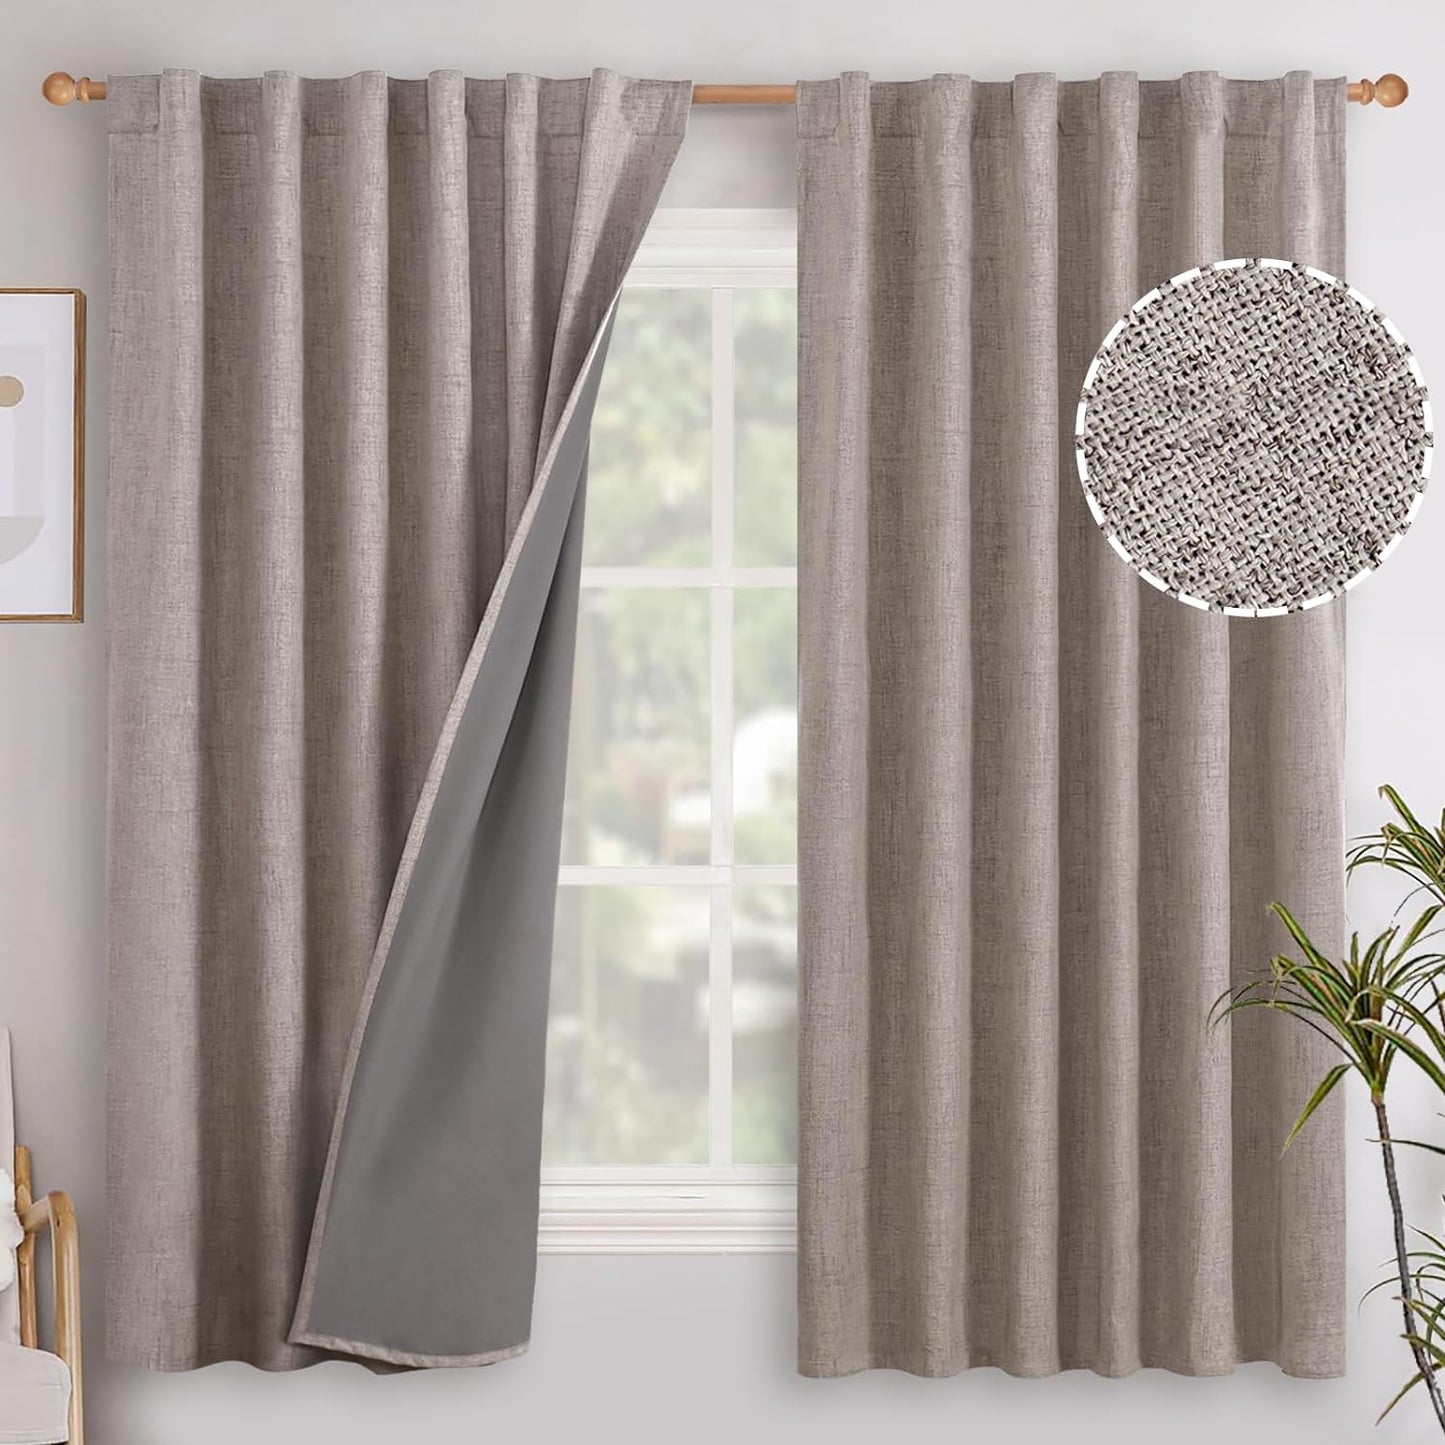 Youngstex Linen Blackout Curtains 63 Inch Length, Grommet Darkening Bedroom Curtains Burlap Linen Window Drapes Thermal Insulated for Basement Summer Heat, 2 Panels, 52 X 63 Inch, Beige  YoungsTex Back Tab/Burlap 52W X 63L 